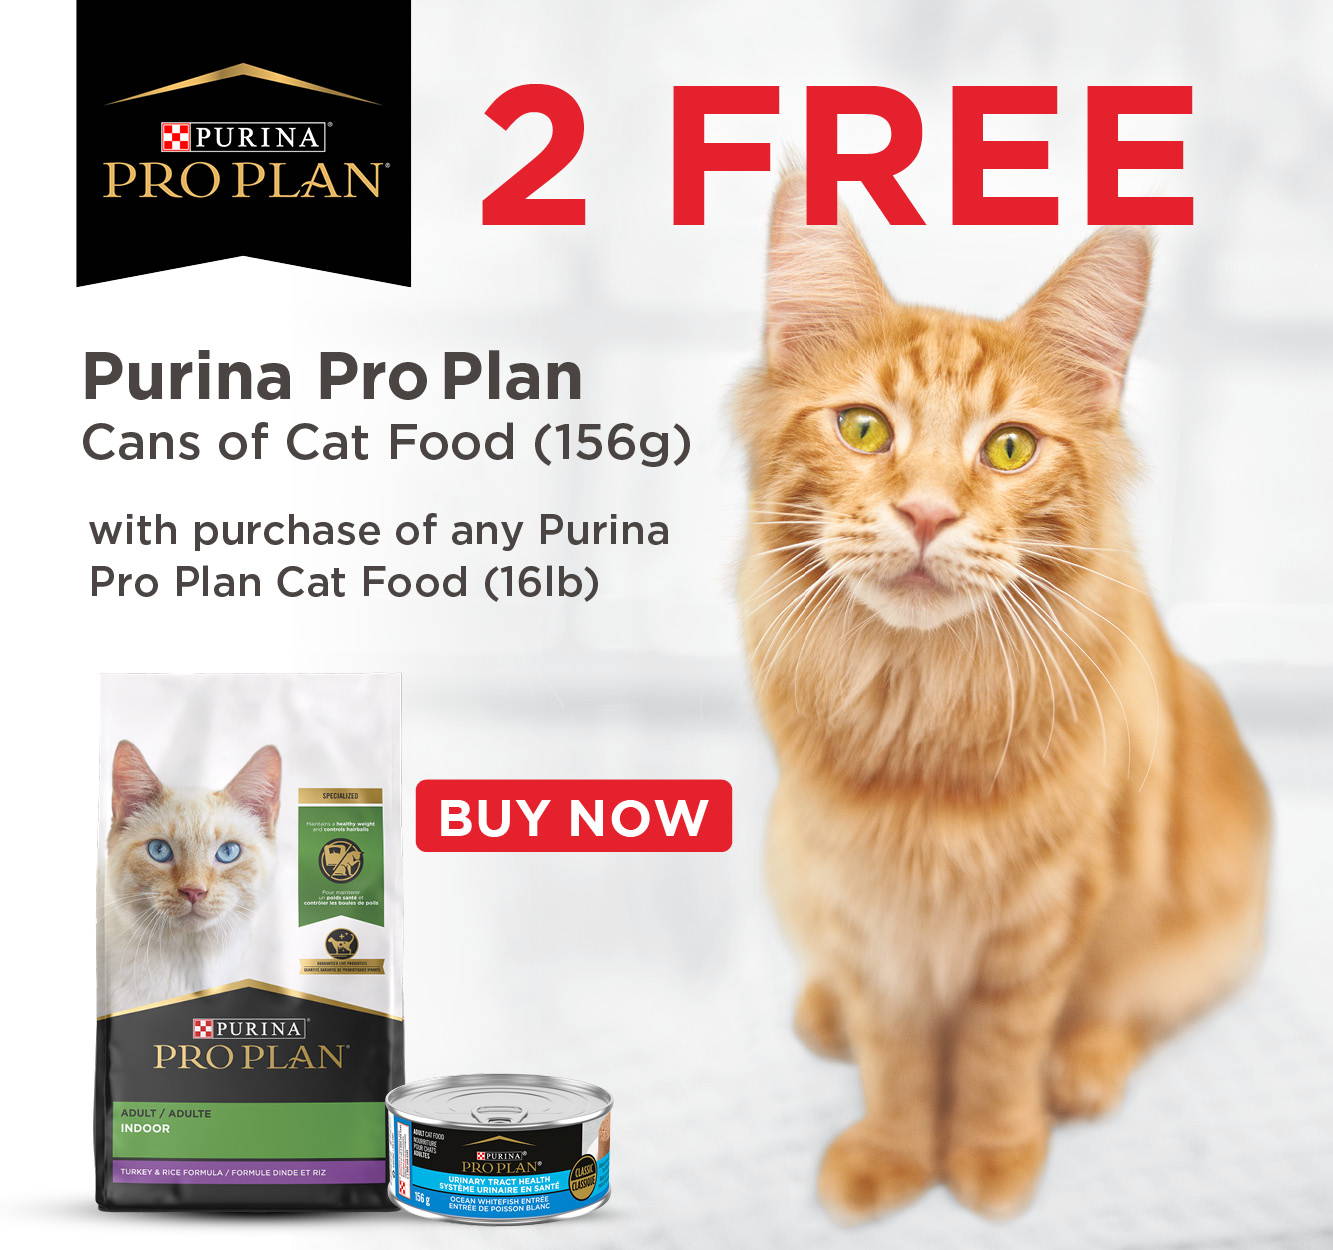 2 free Purina Pro Plan cans of cat food (156g) with purchase of any Purina Pro Plan cat food (16lb)